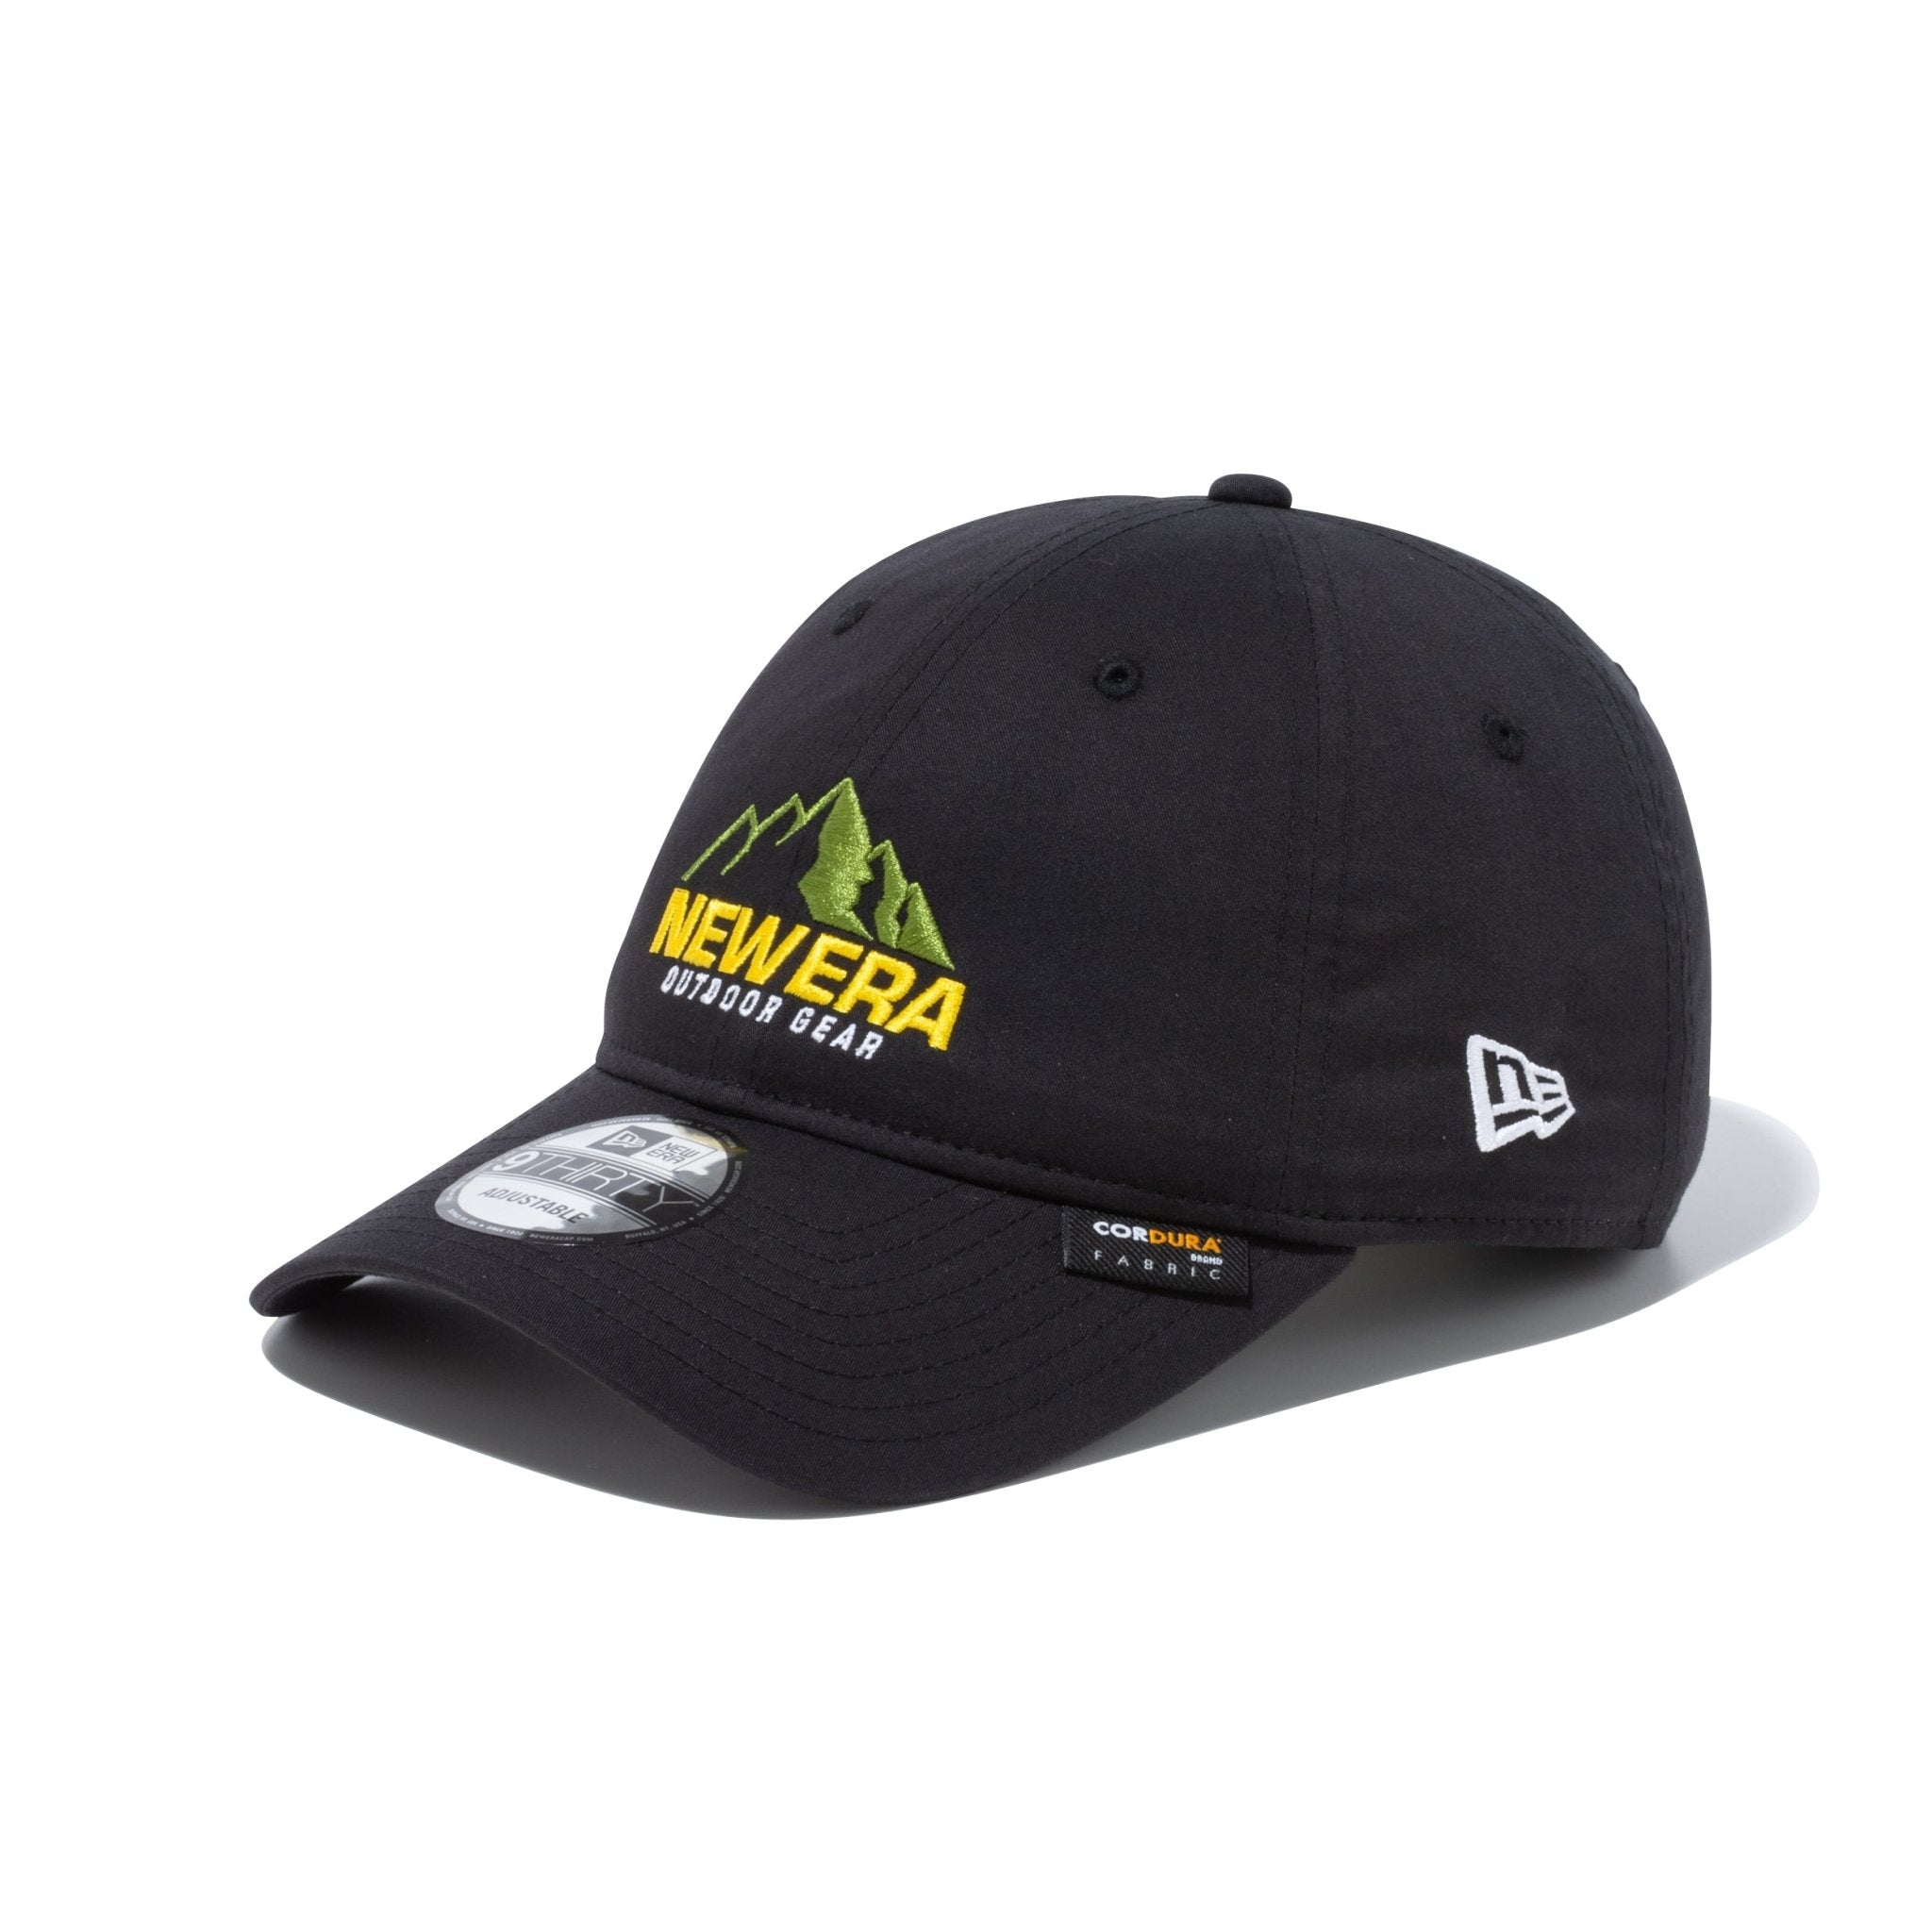 9THIRTY CORDURA (made with COOLMAX fabric) NEW ERA Outdoor Gear ...